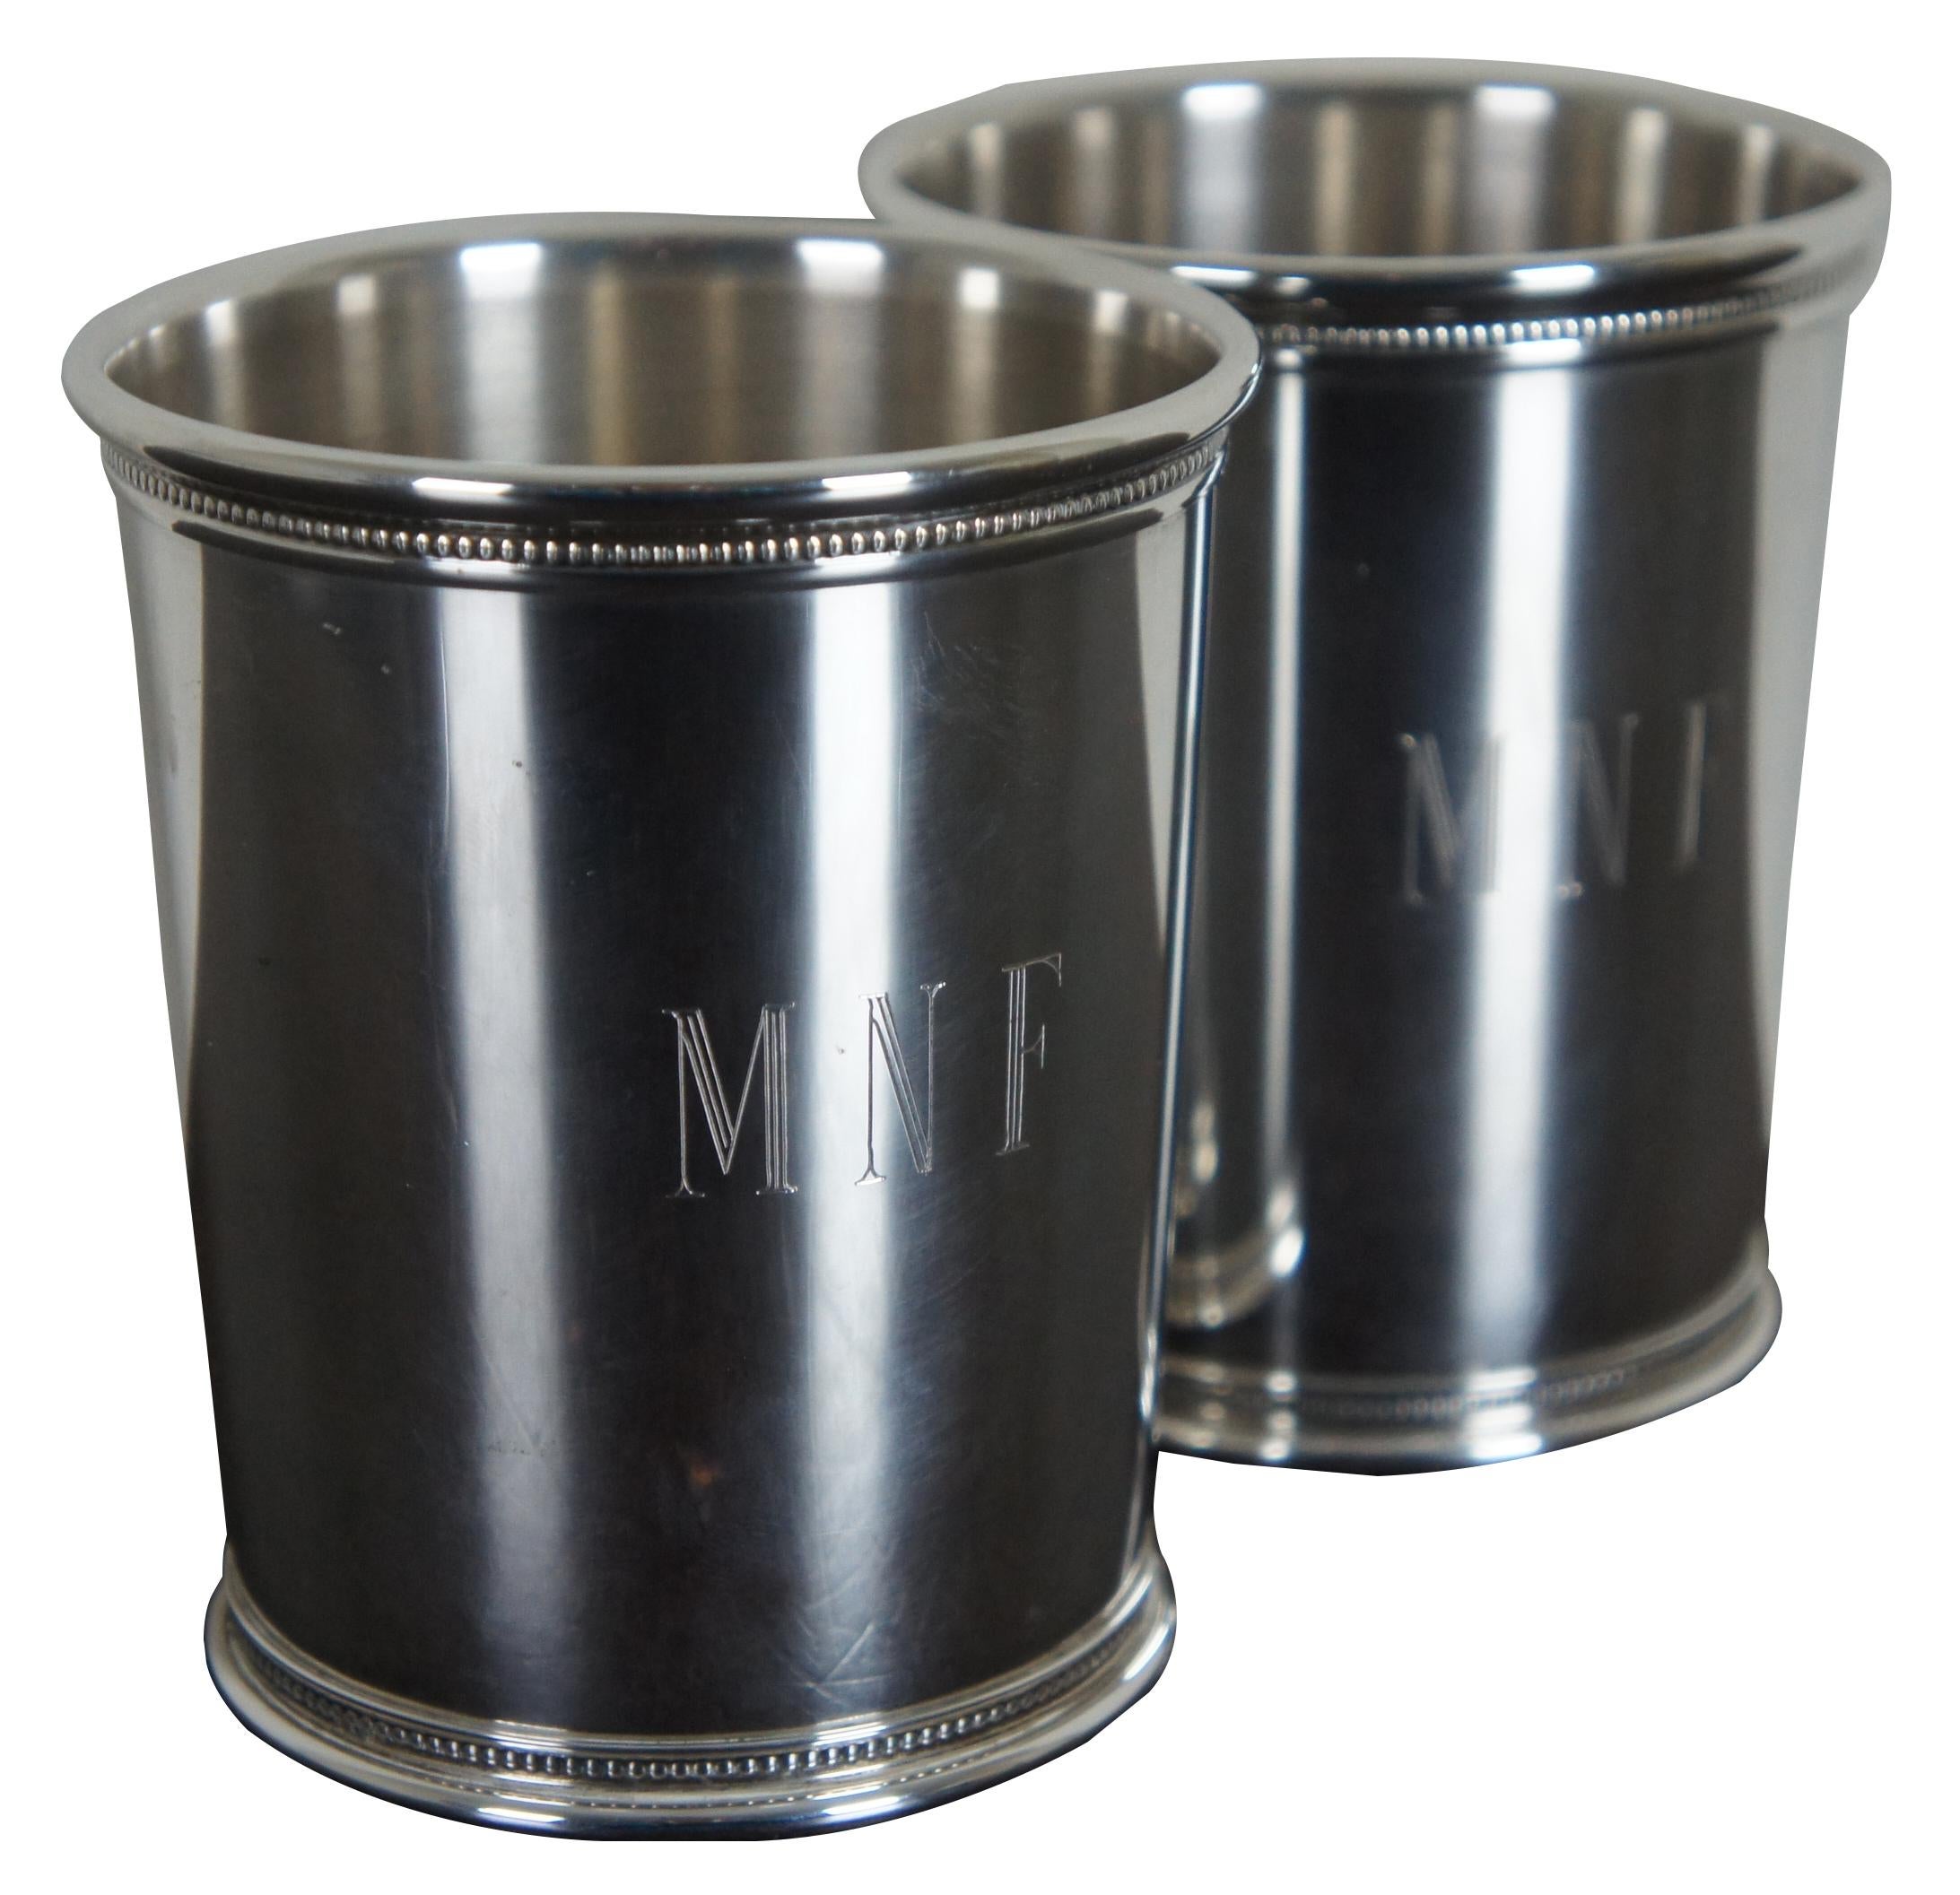 2 Sterling silver bill clinton presidential mint Julep cups Reed Barton WJC x253

2 Sterling silver .925 10 ounce mint julip / derby cup. Marked WJC (William Jefferson Clinton AKA BIll) - 42th President) Reed & Barton, x253. Sterling. Both